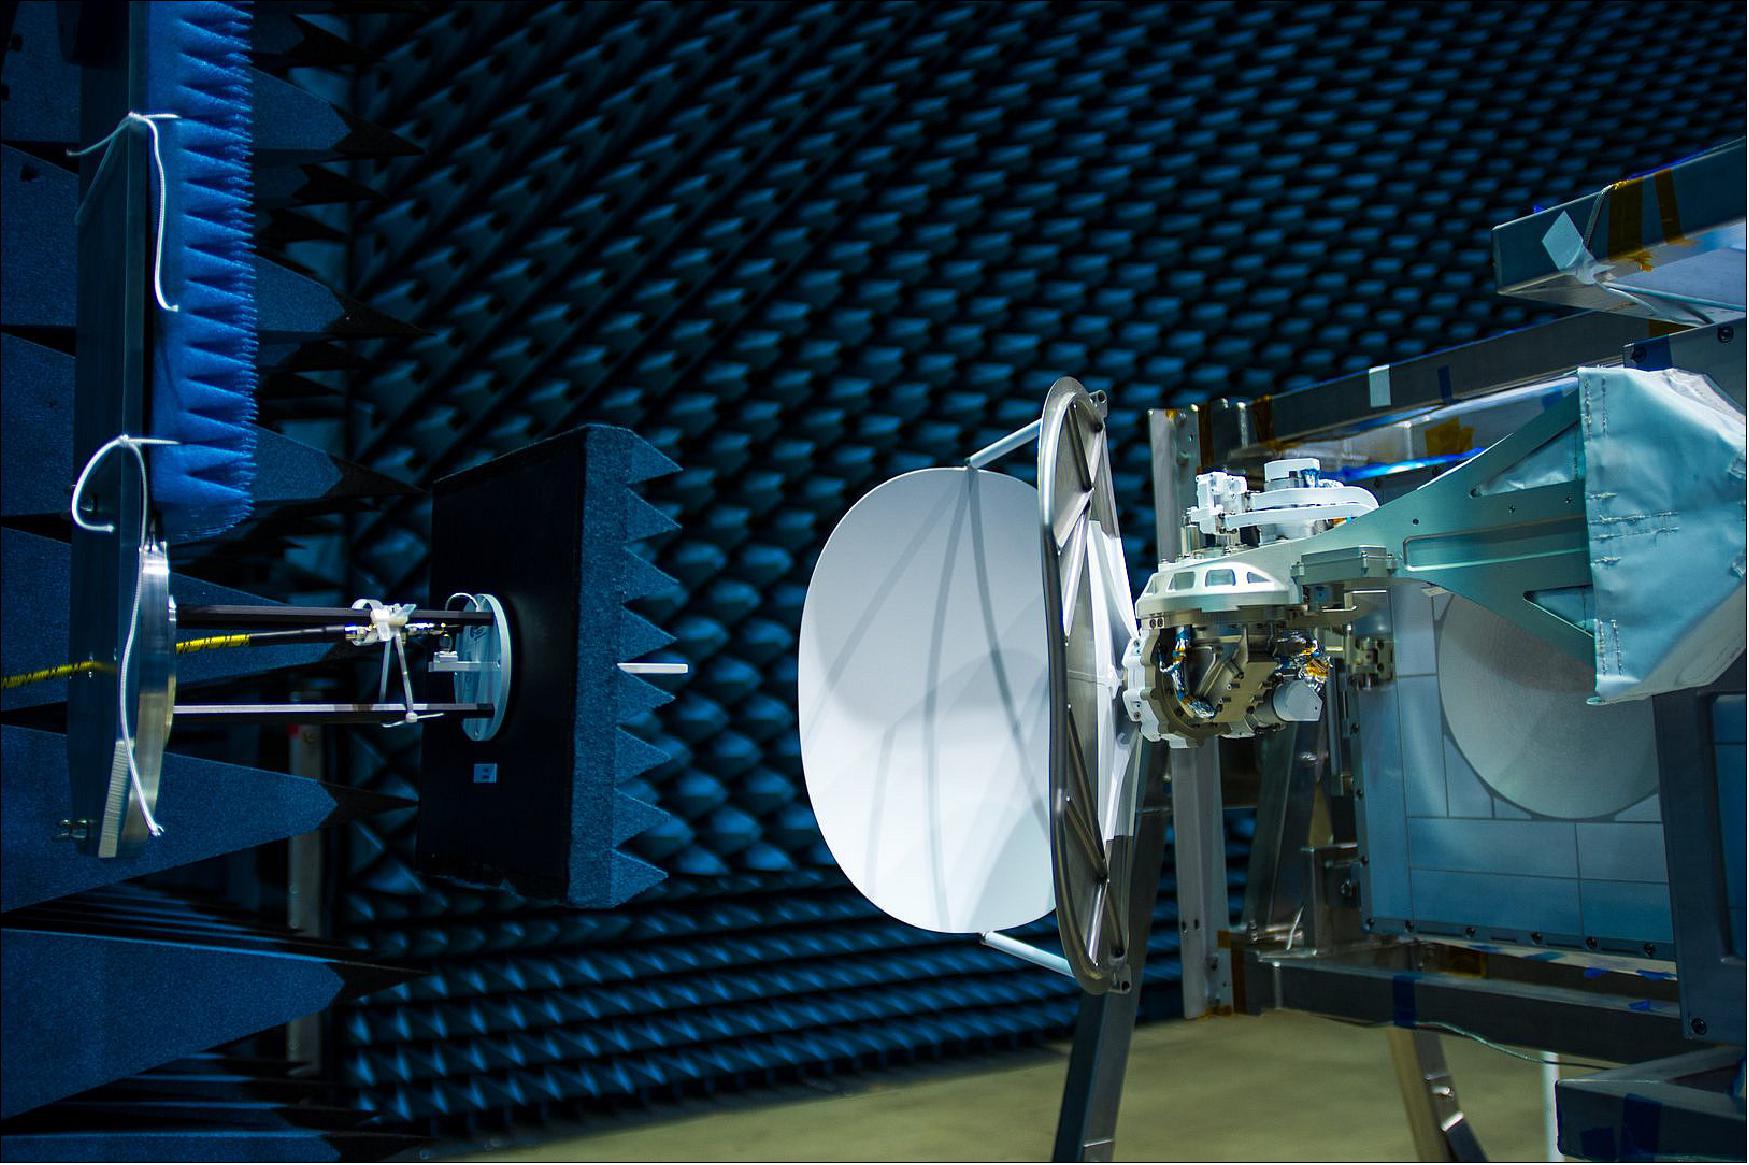 Figure 2: The COLKa antenna is being tested in the Hertz Test Chamber of ESA/ESTEC (image credit: ESA, M. Cowan) 6)